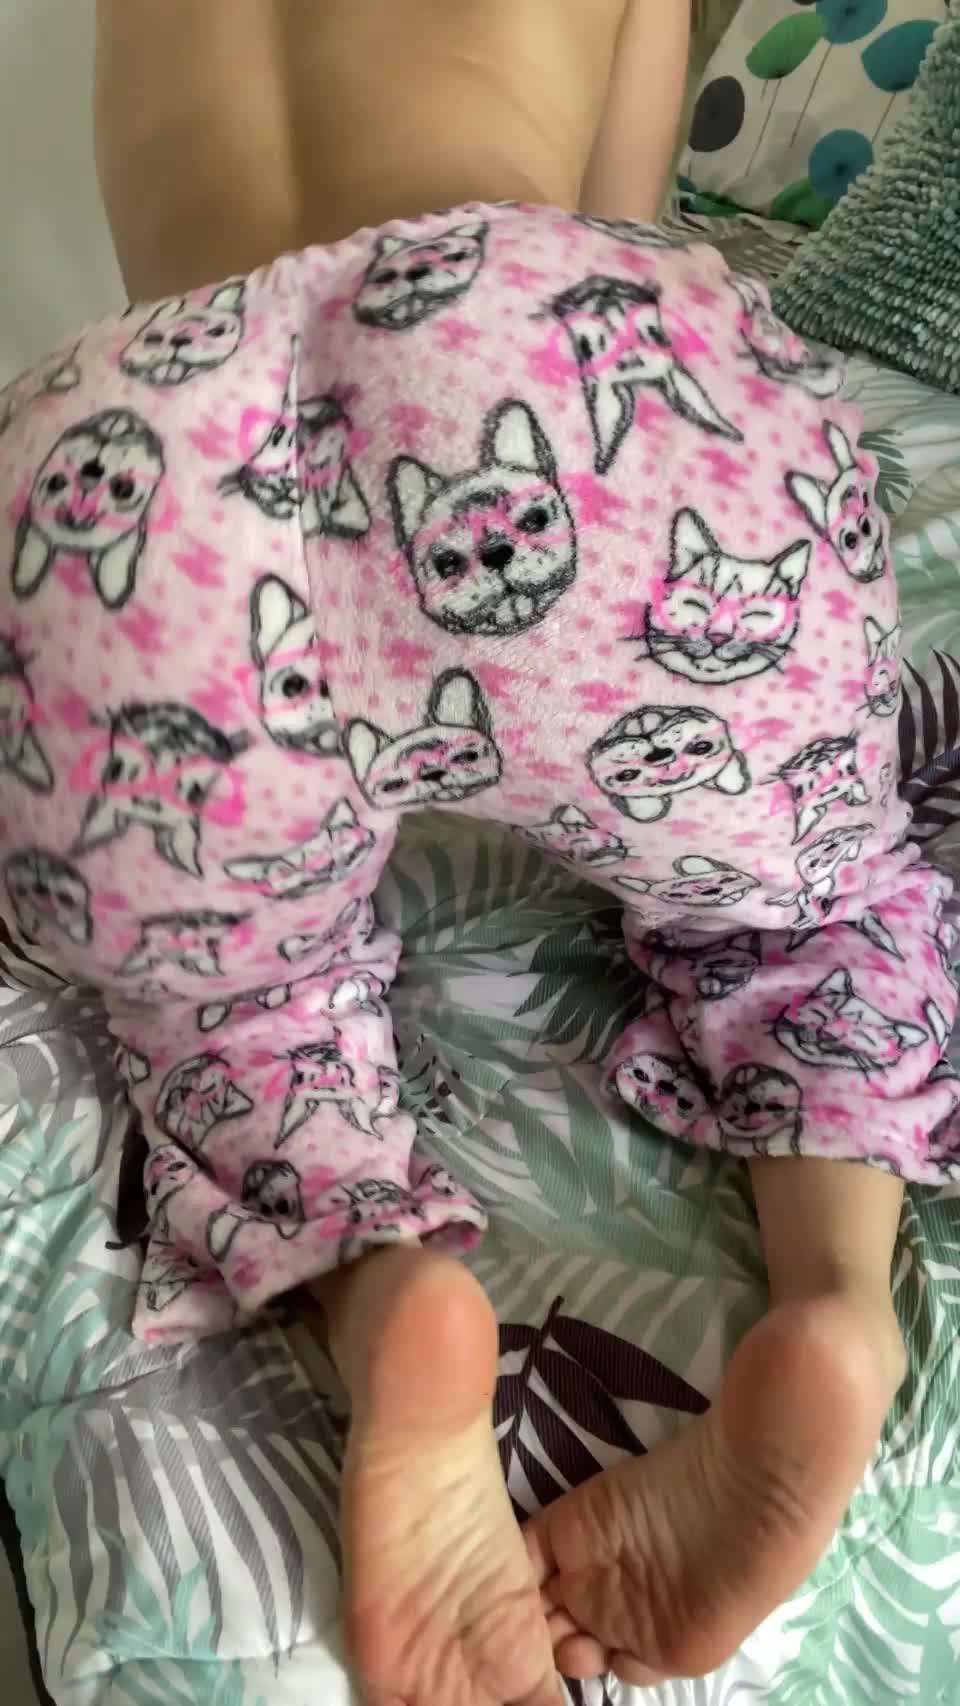 Look what there was hiding in these pijamas